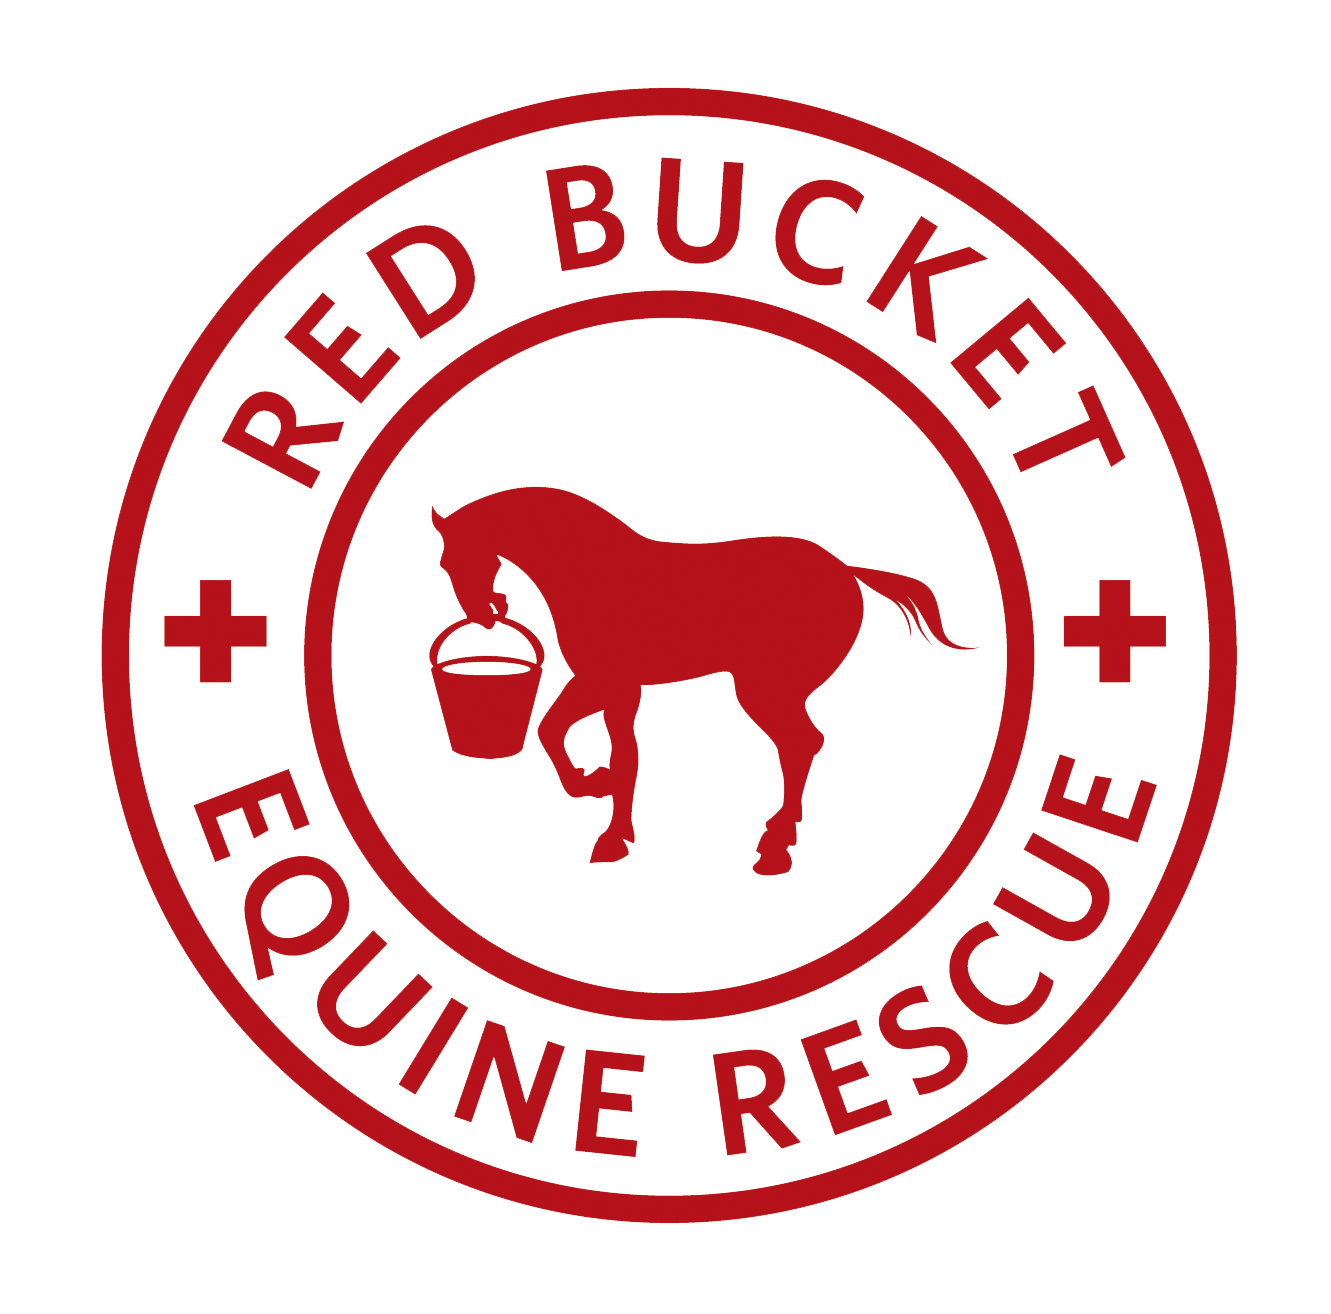 Horse Rescue Logo - Introduction Video. Red Bucket Equine Rescue